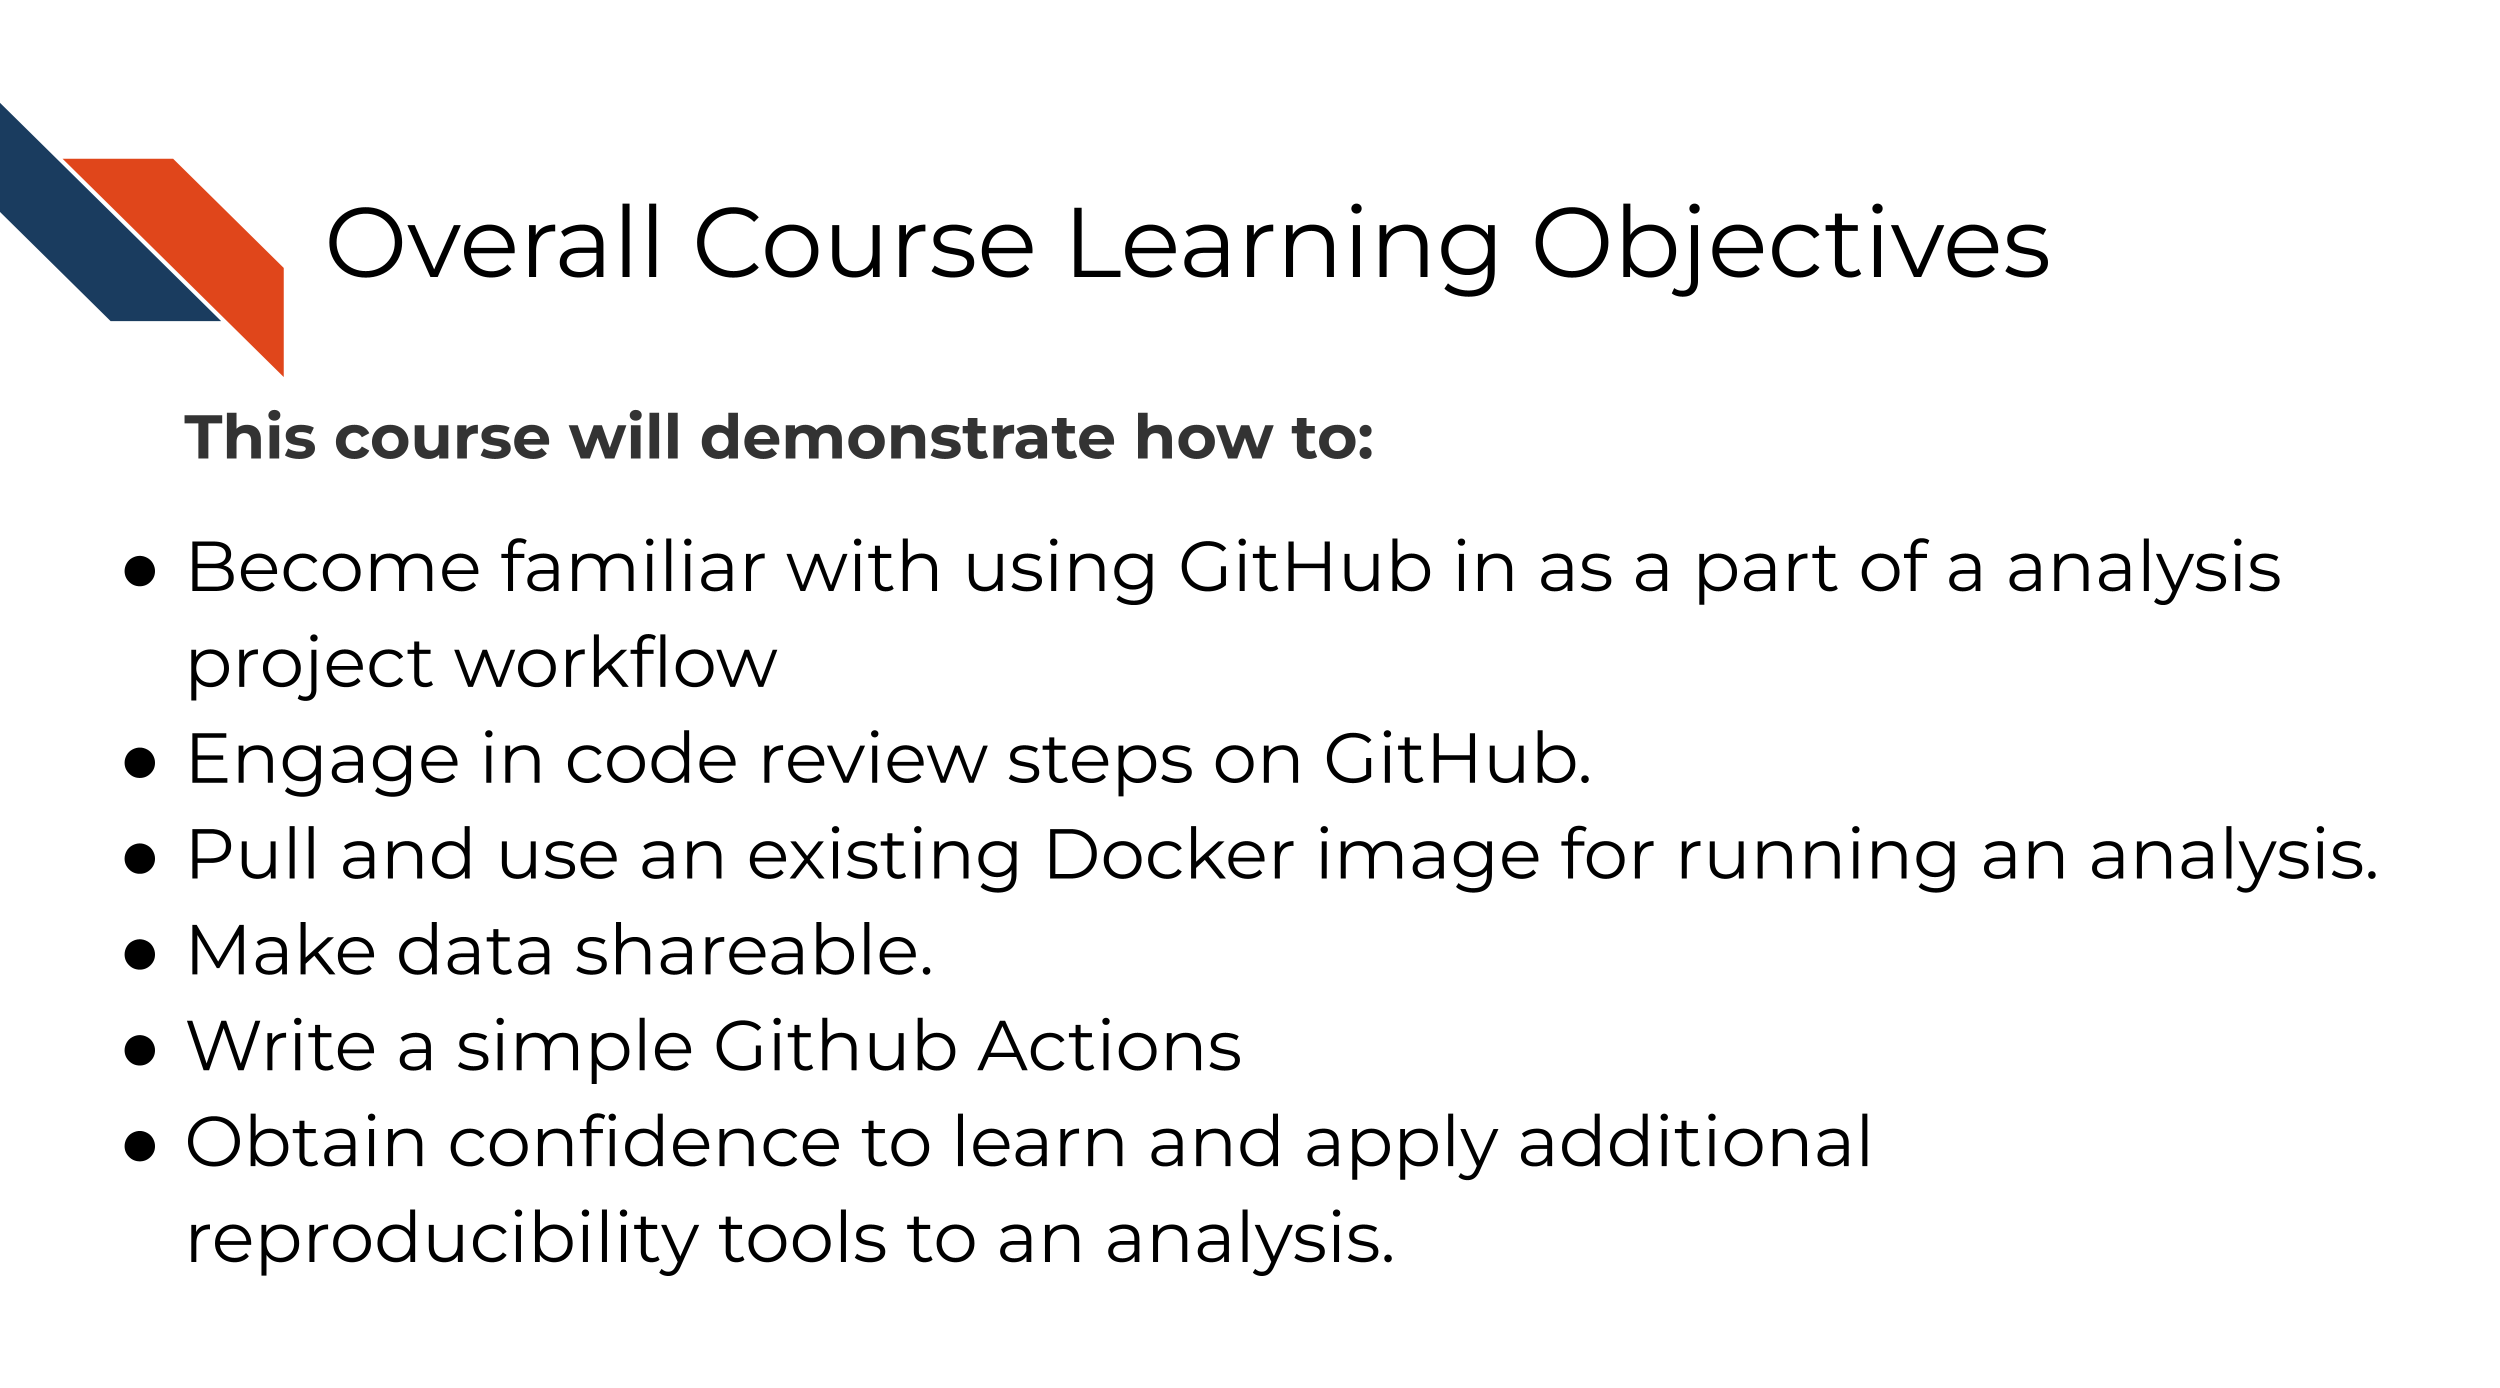 This course will demonstrate how to: Become familiar with using GitHub in as a part of a analysis project workflow. Engage in code review steps on GitHub. Pull and use an existing Docker image for running an analysis. Make data shareable. Write a simple Github Actions. Obtain confidence to learn and apply additional reproducibility tools to an analysis.